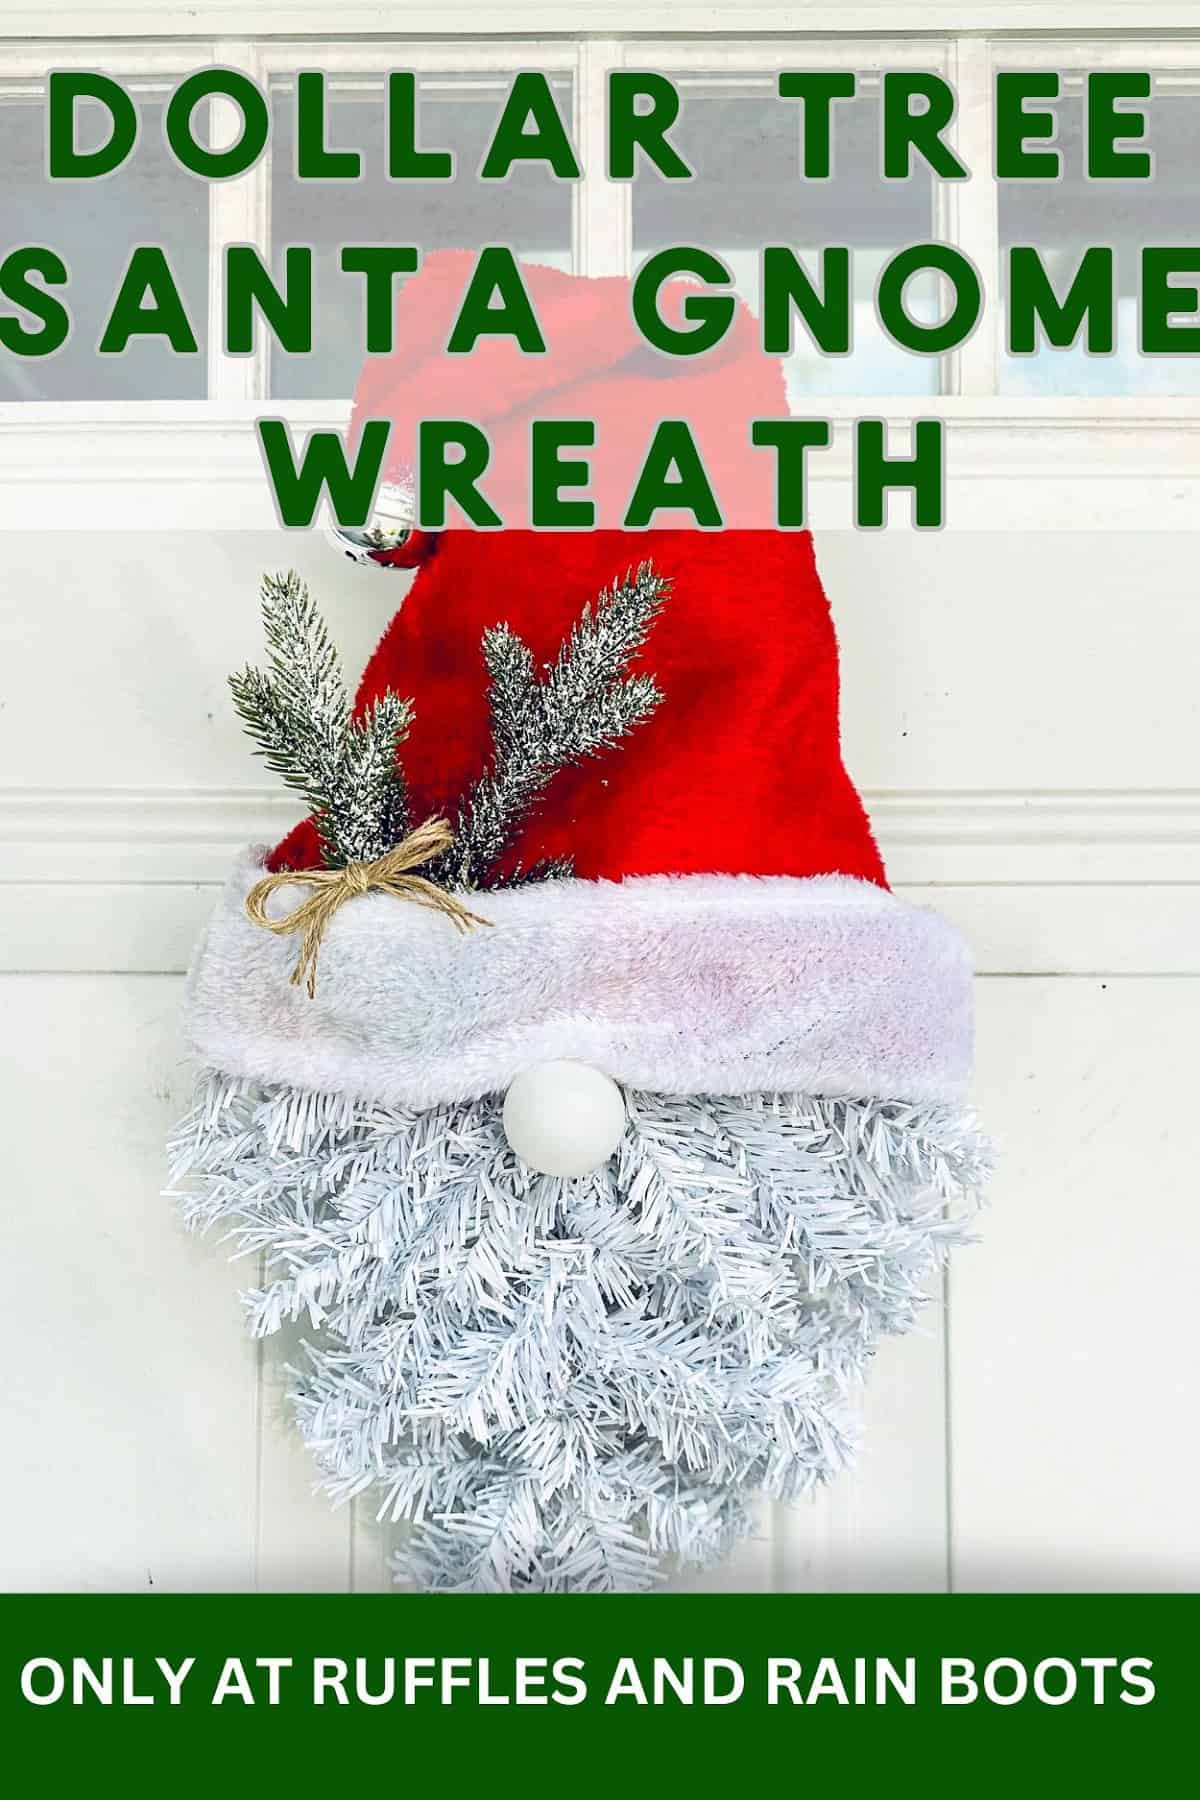 Vertical close up image of a Dollar Tree Santa gnome wreath hanging on a white door.